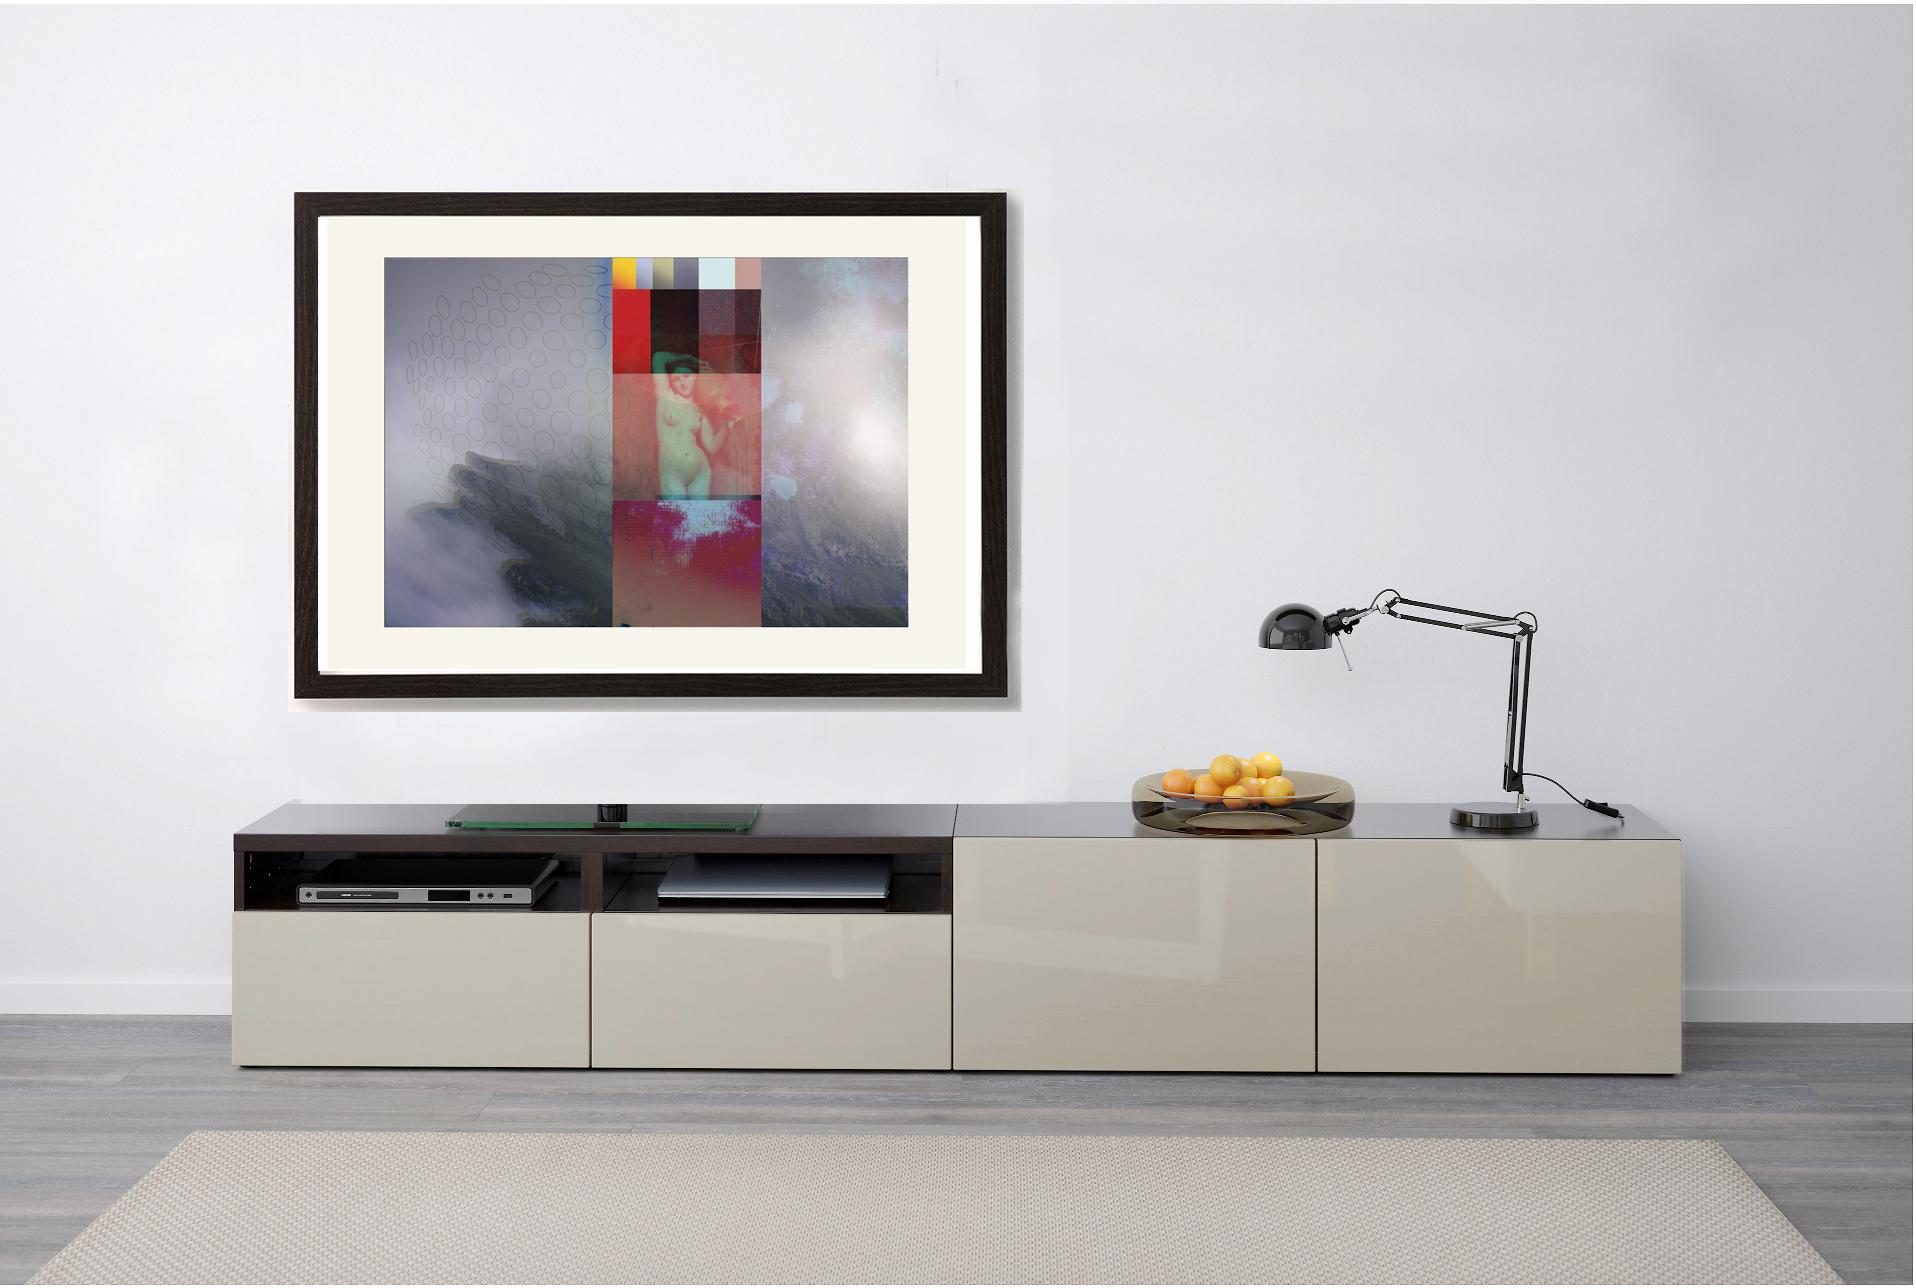  F102 - Contemporary, Abstract, Expressionist, Modern, Pop art, Surrealist,  - Gray Nude Print by Francisco Nicolás